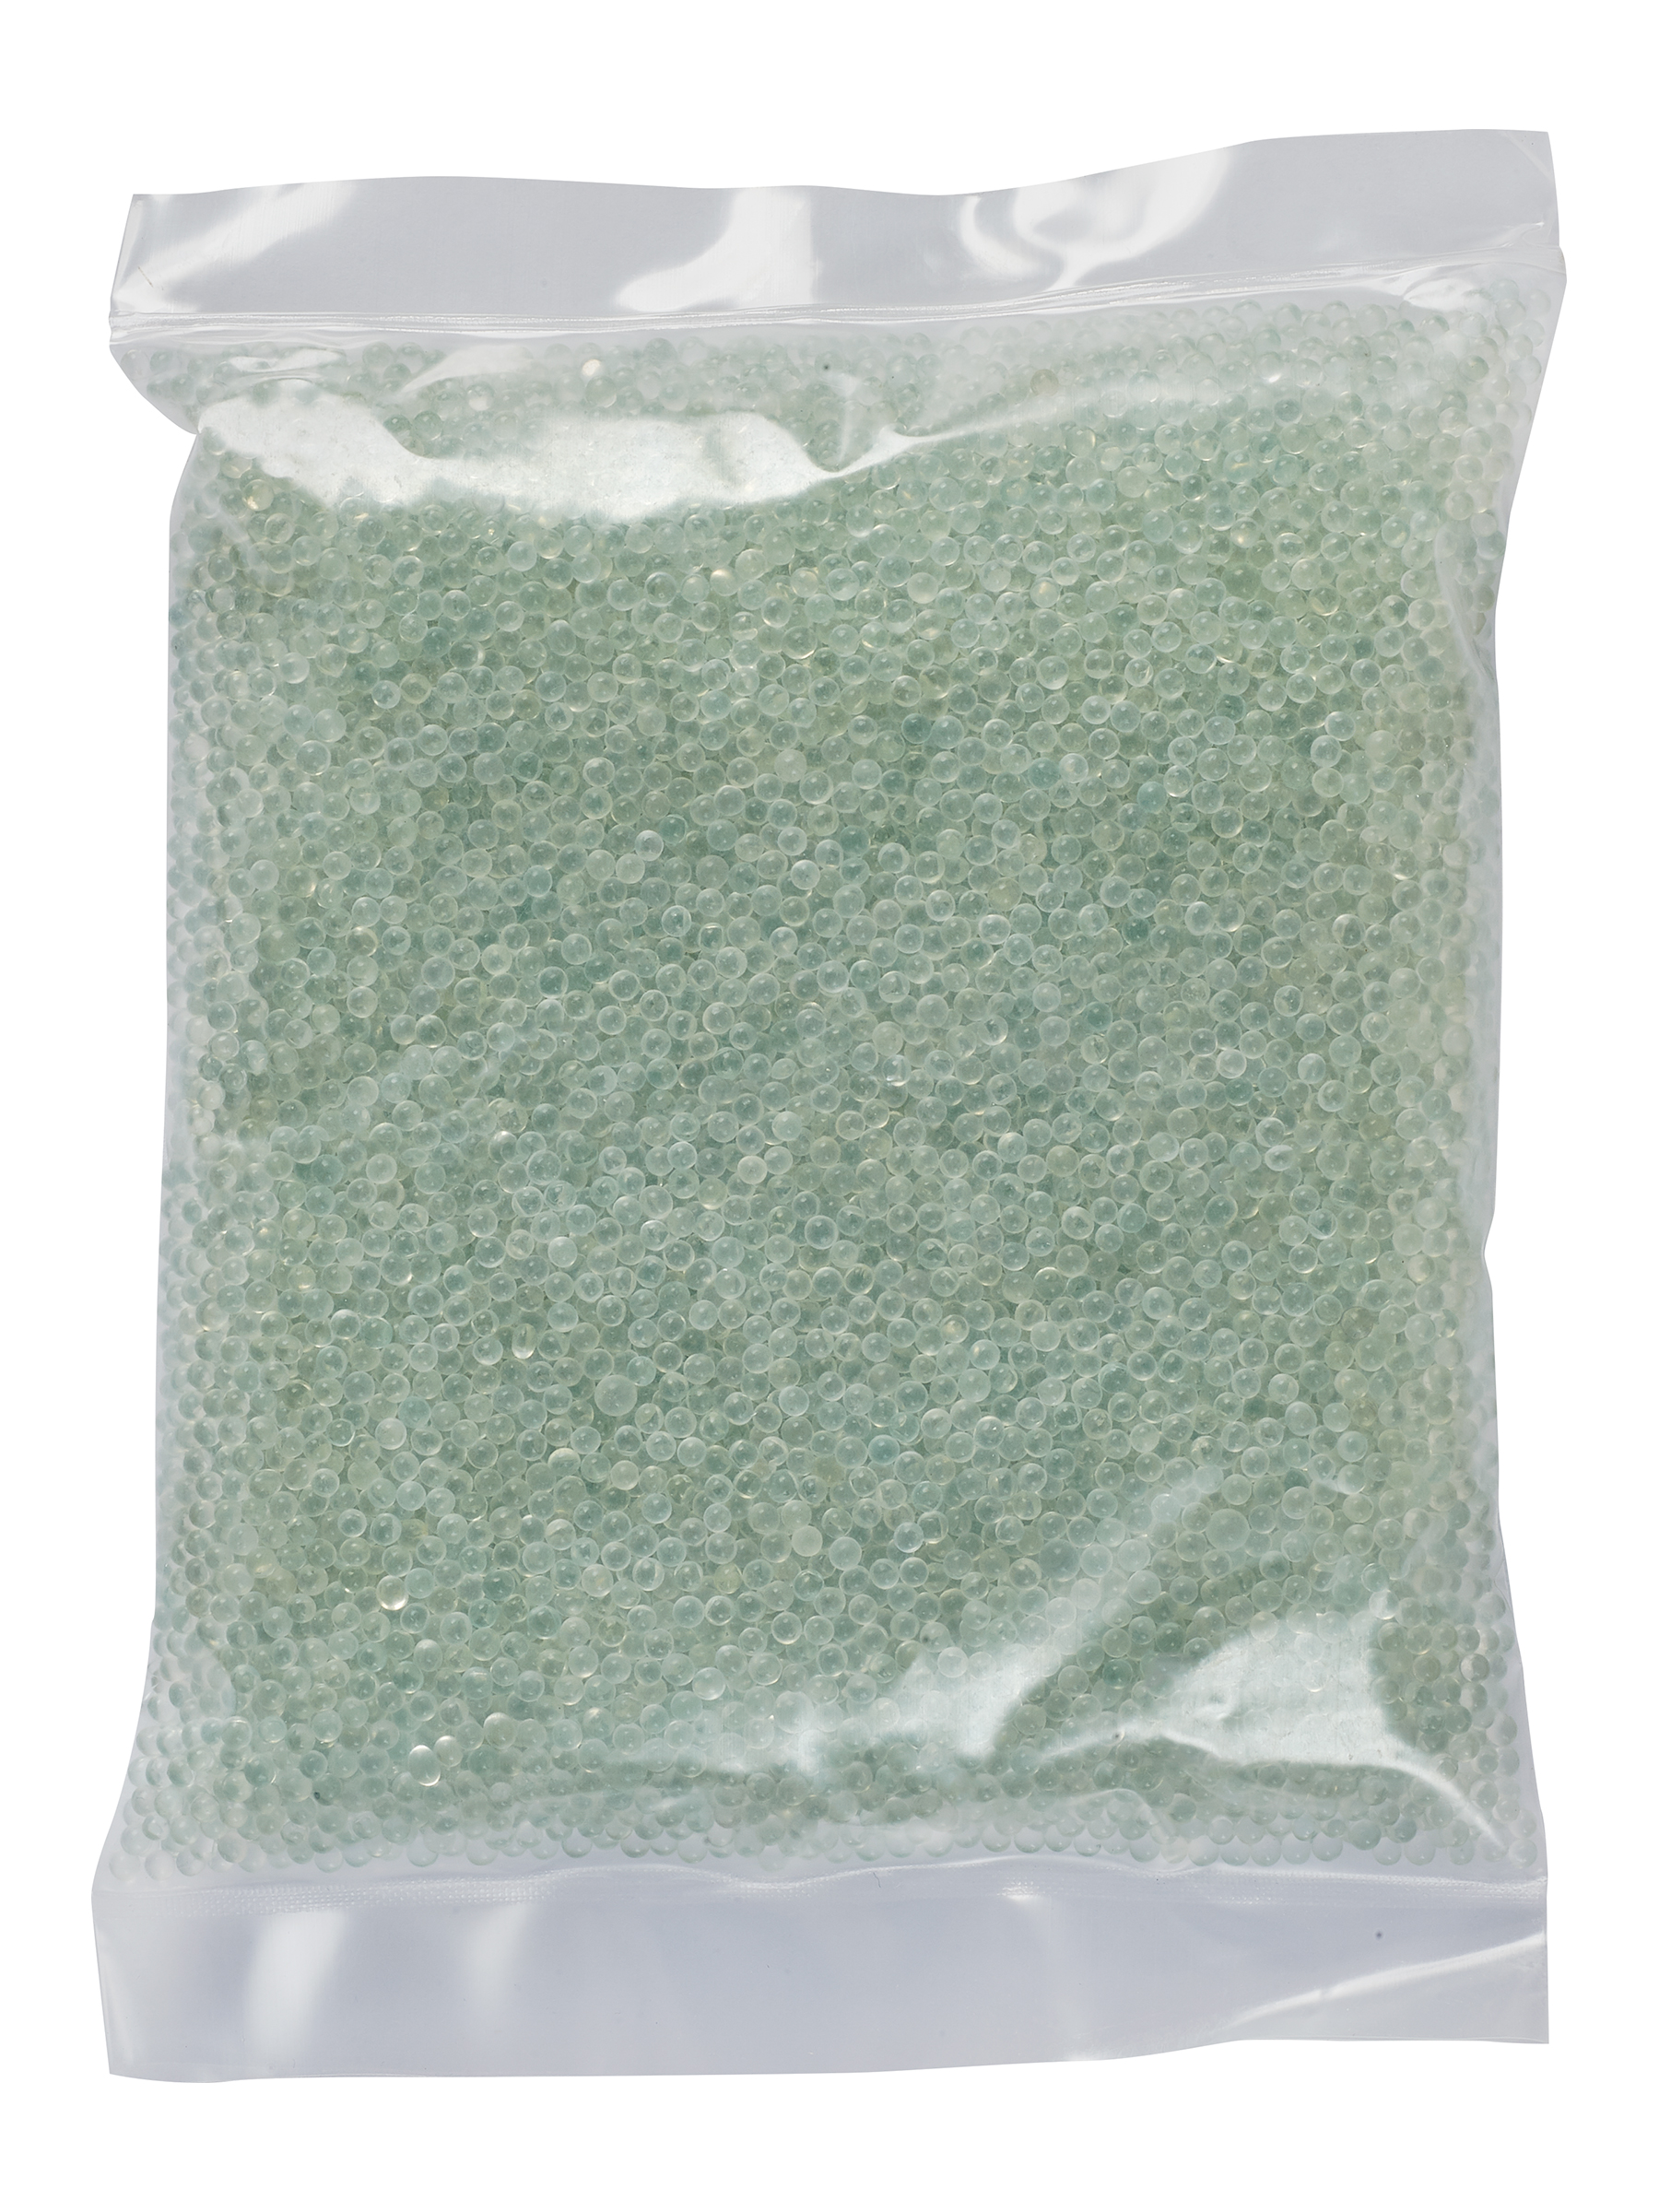 Replacement Beads for Hot Bead Sterilizers